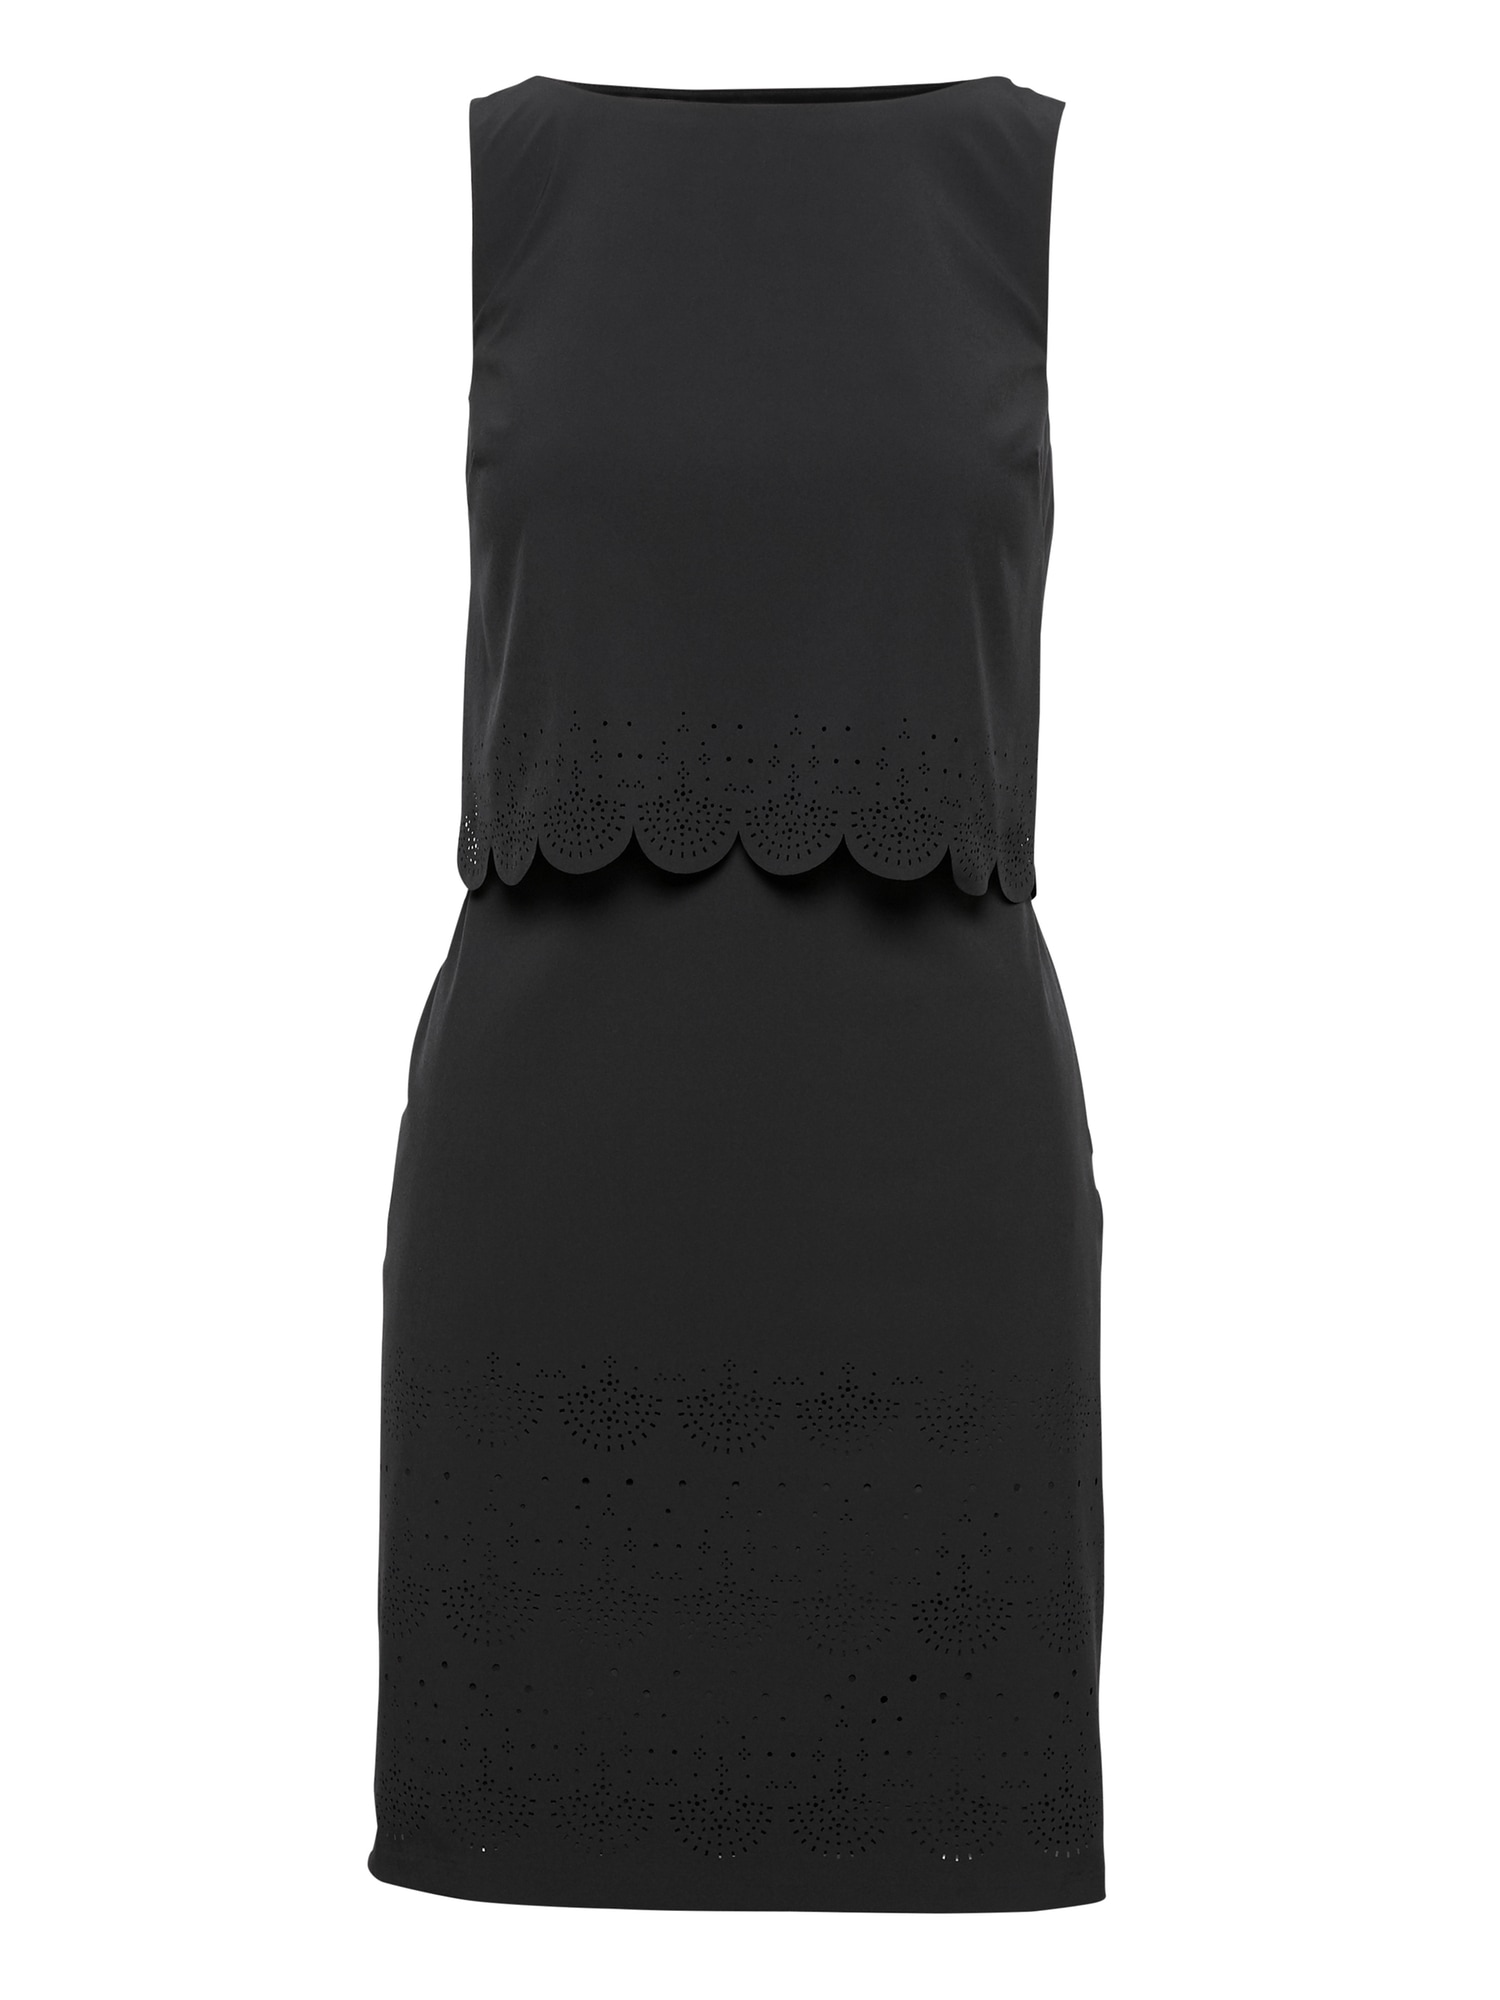 LIFE IN MOTION Performance Dress with Laser-Cut Detail